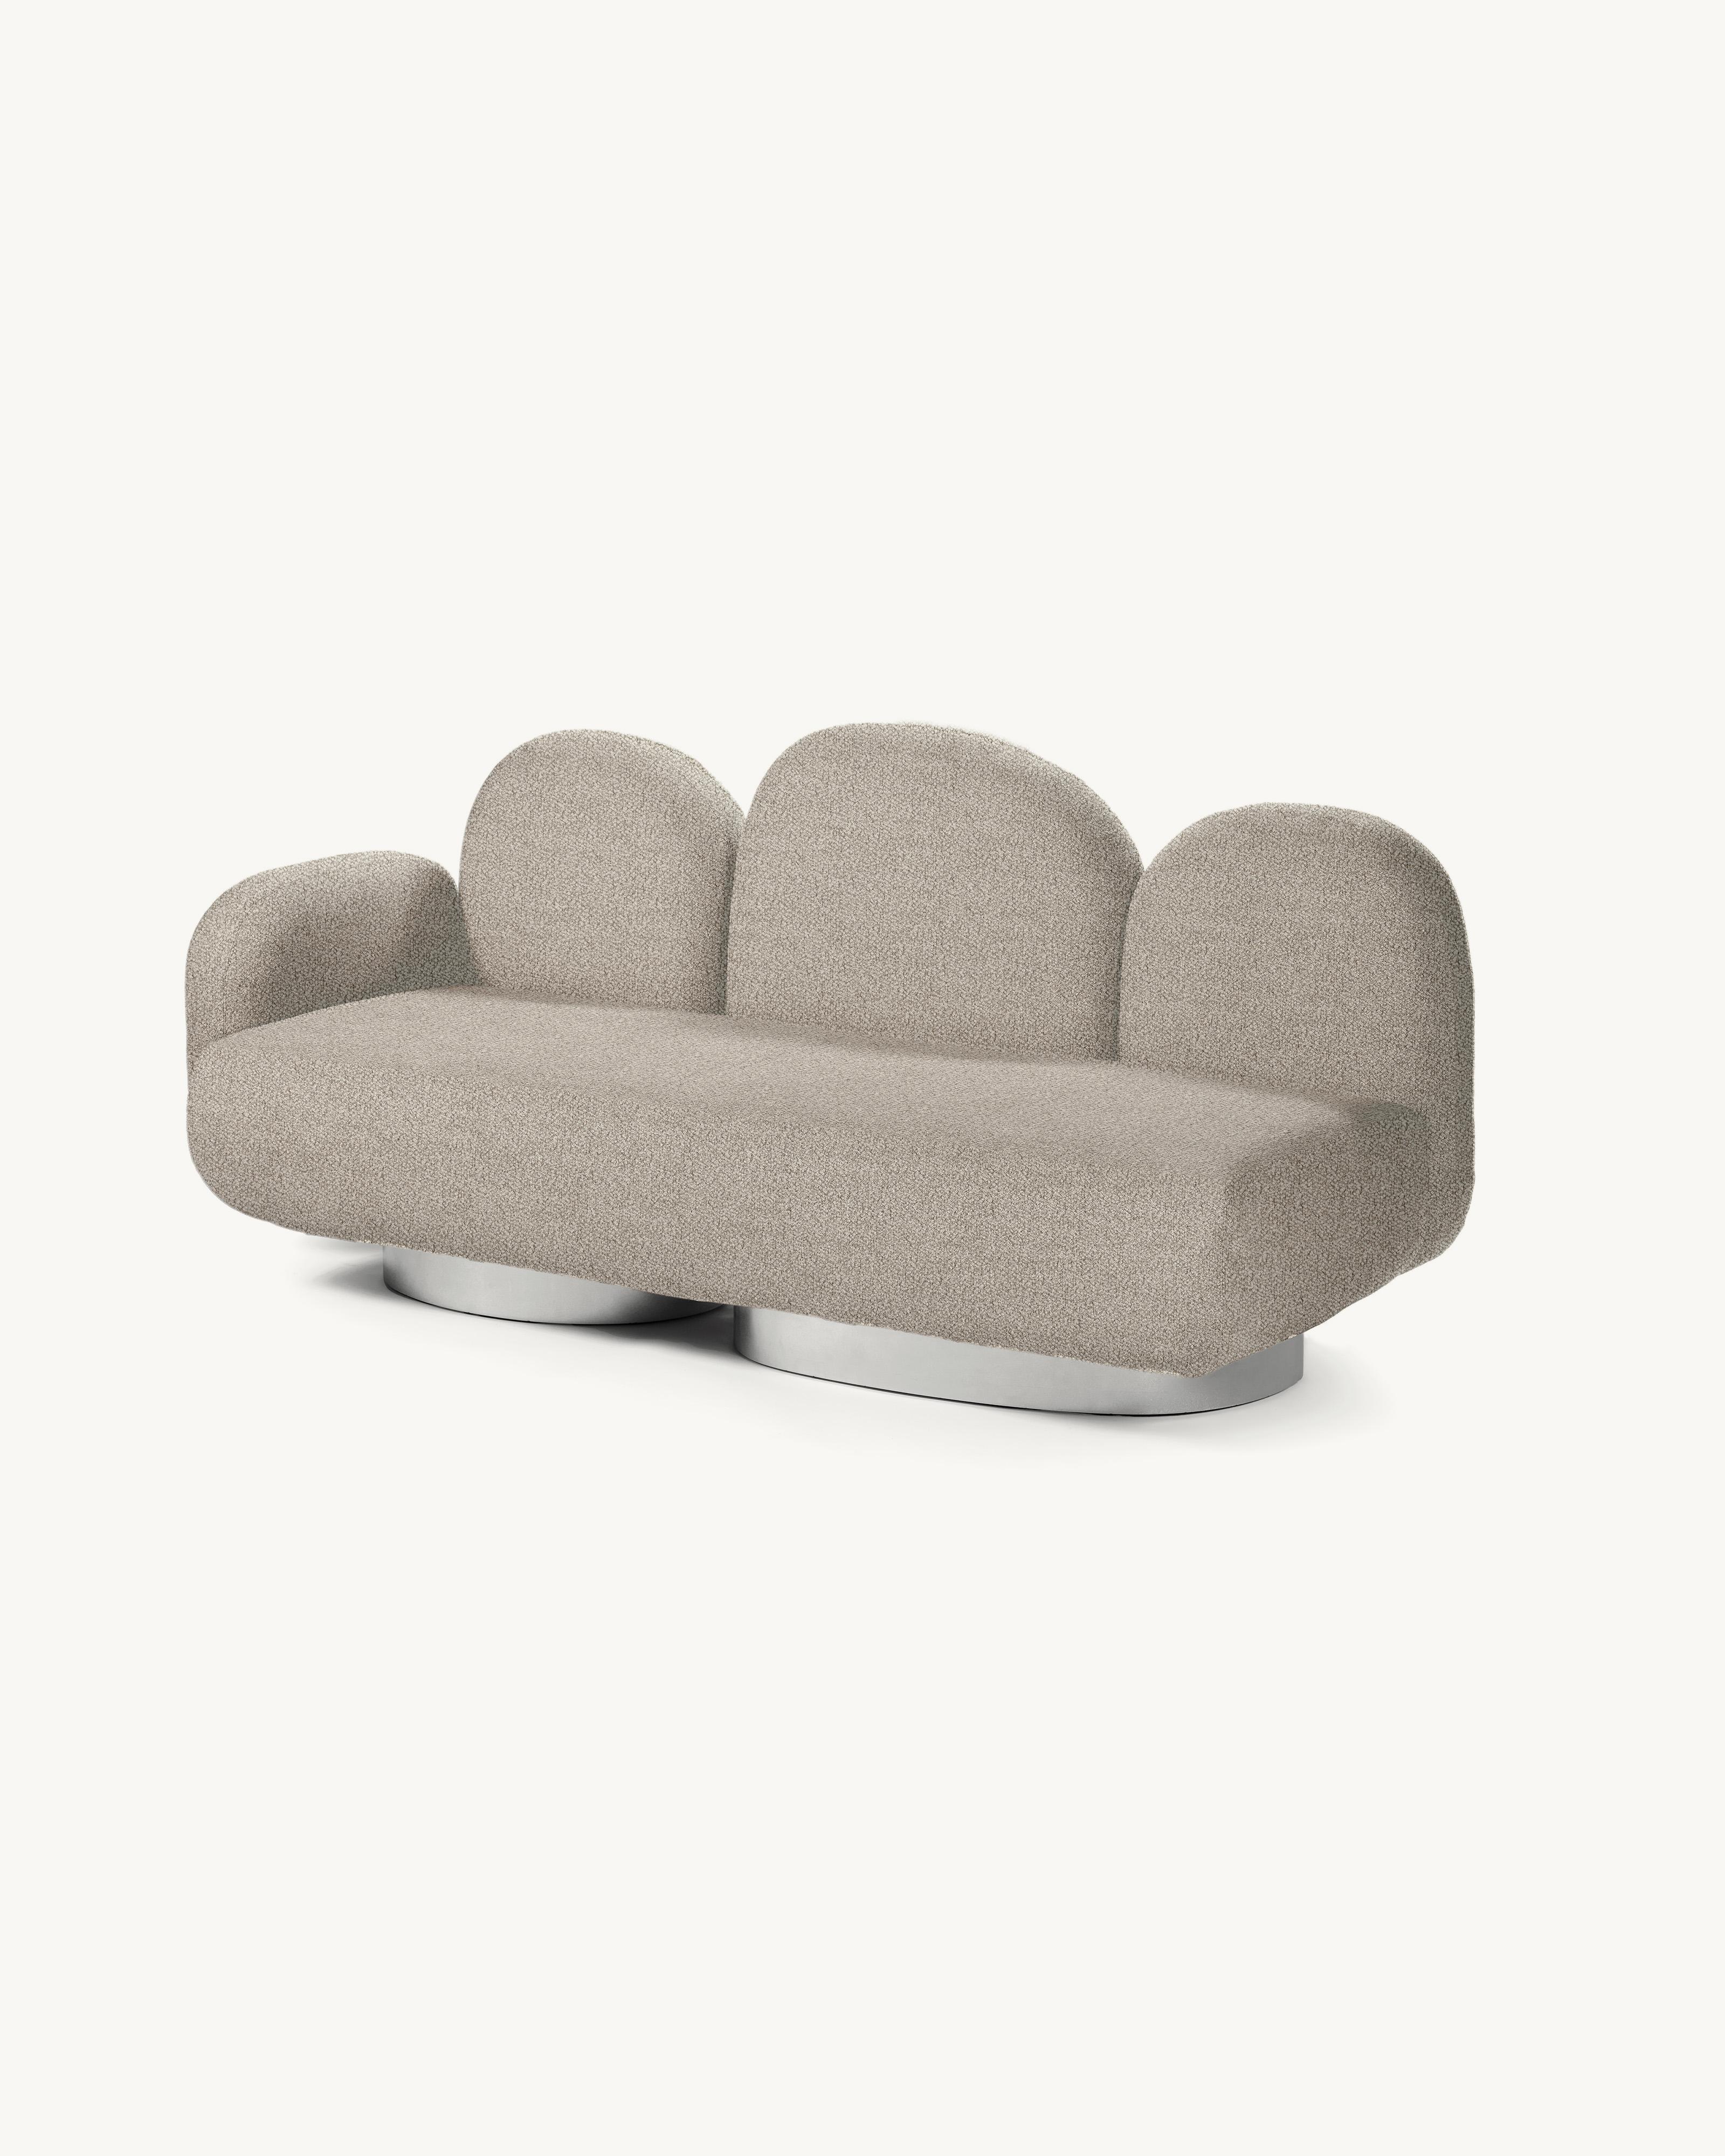 Contemporary Sofa 'Assemble' by Destroyers/Builders, 2 seaters + 1 armrest For Sale 6